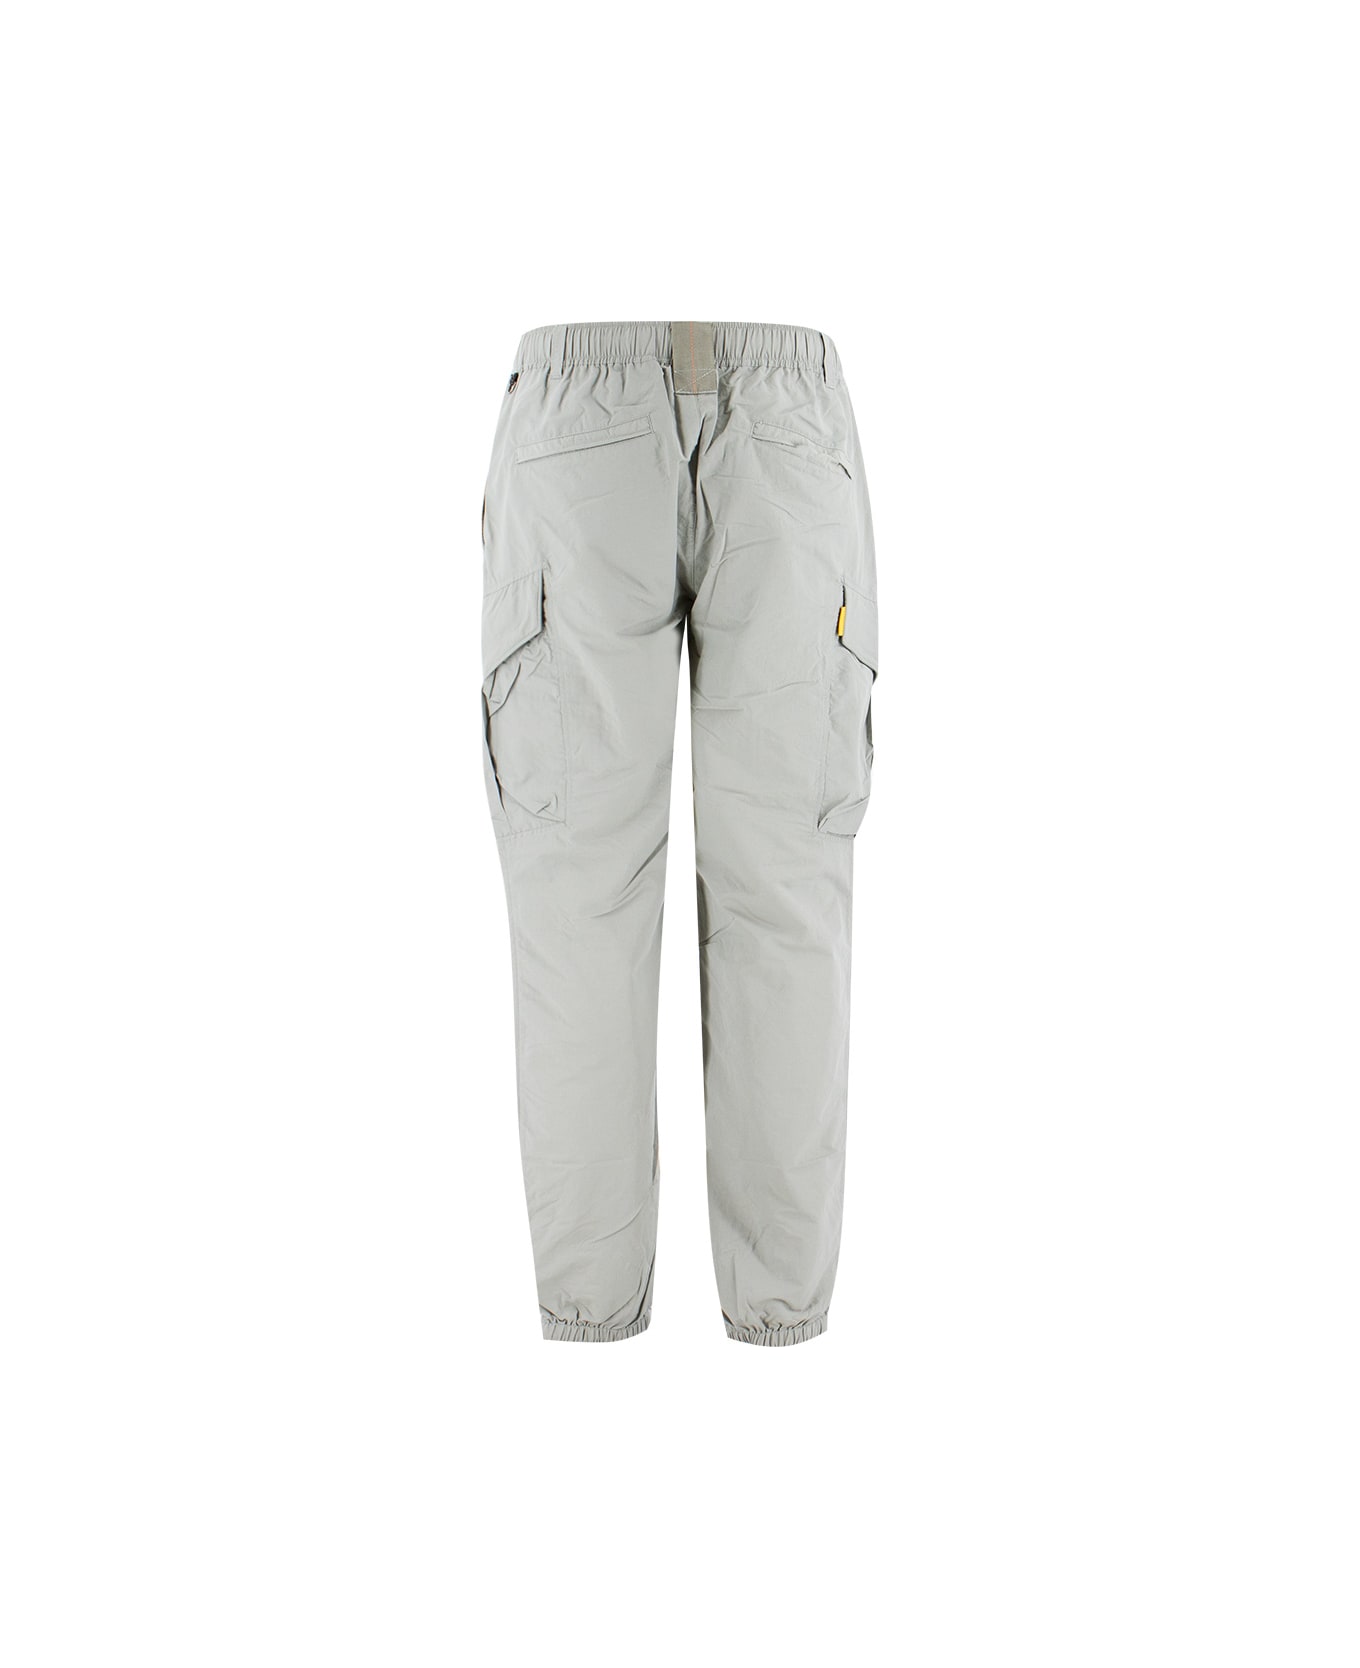 Parajumpers Trousers - SHADOW